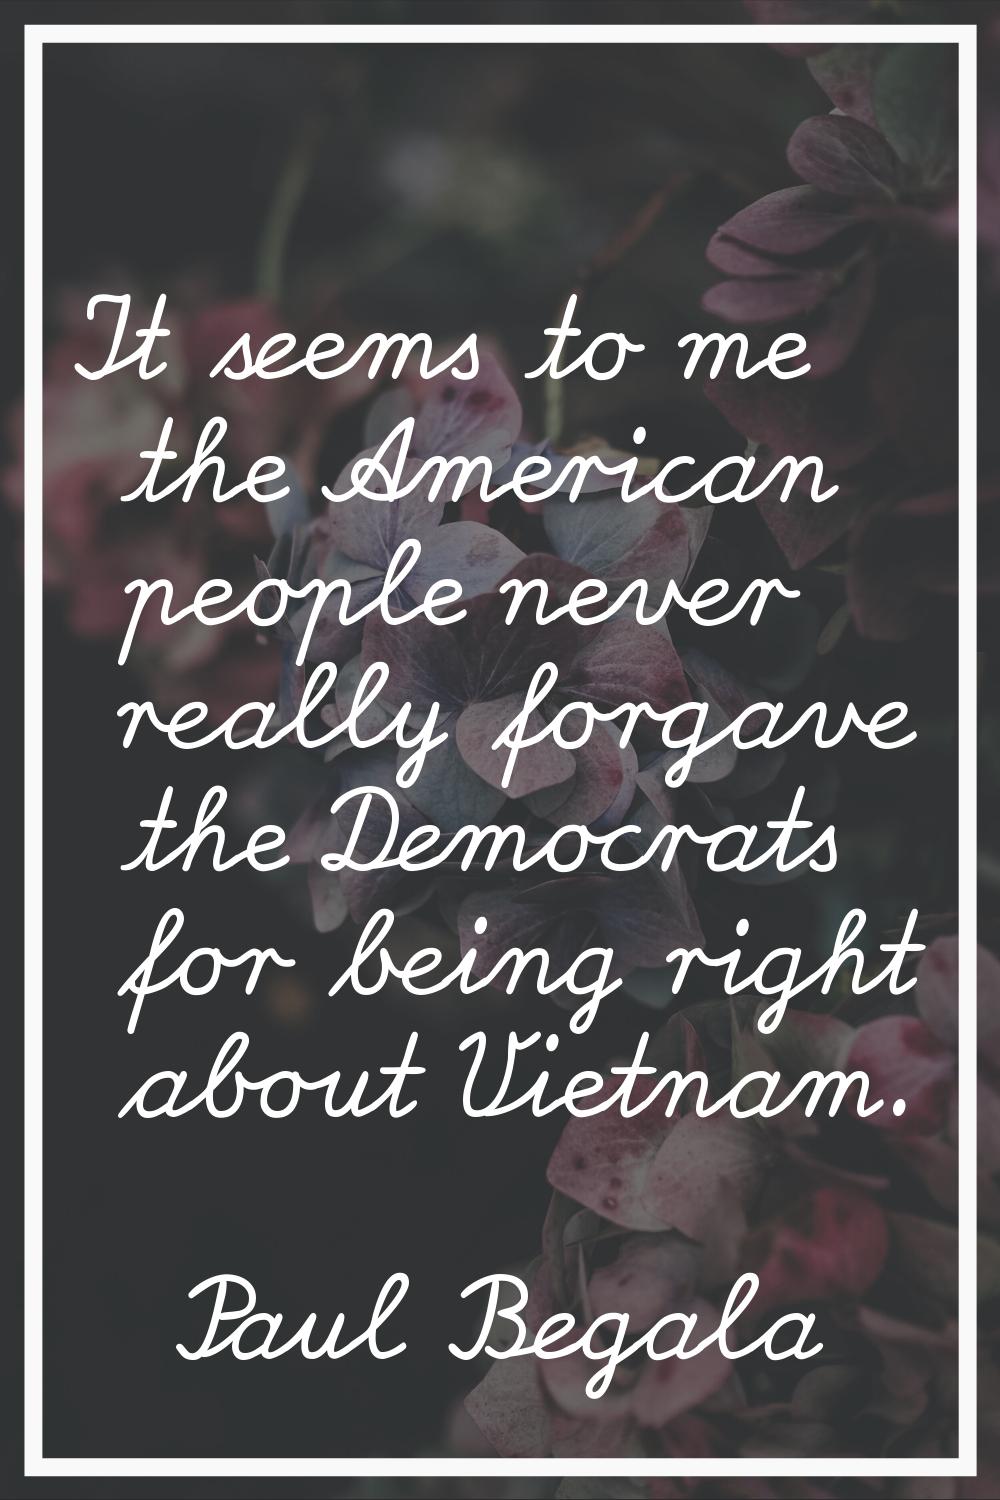 It seems to me the American people never really forgave the Democrats for being right about Vietnam